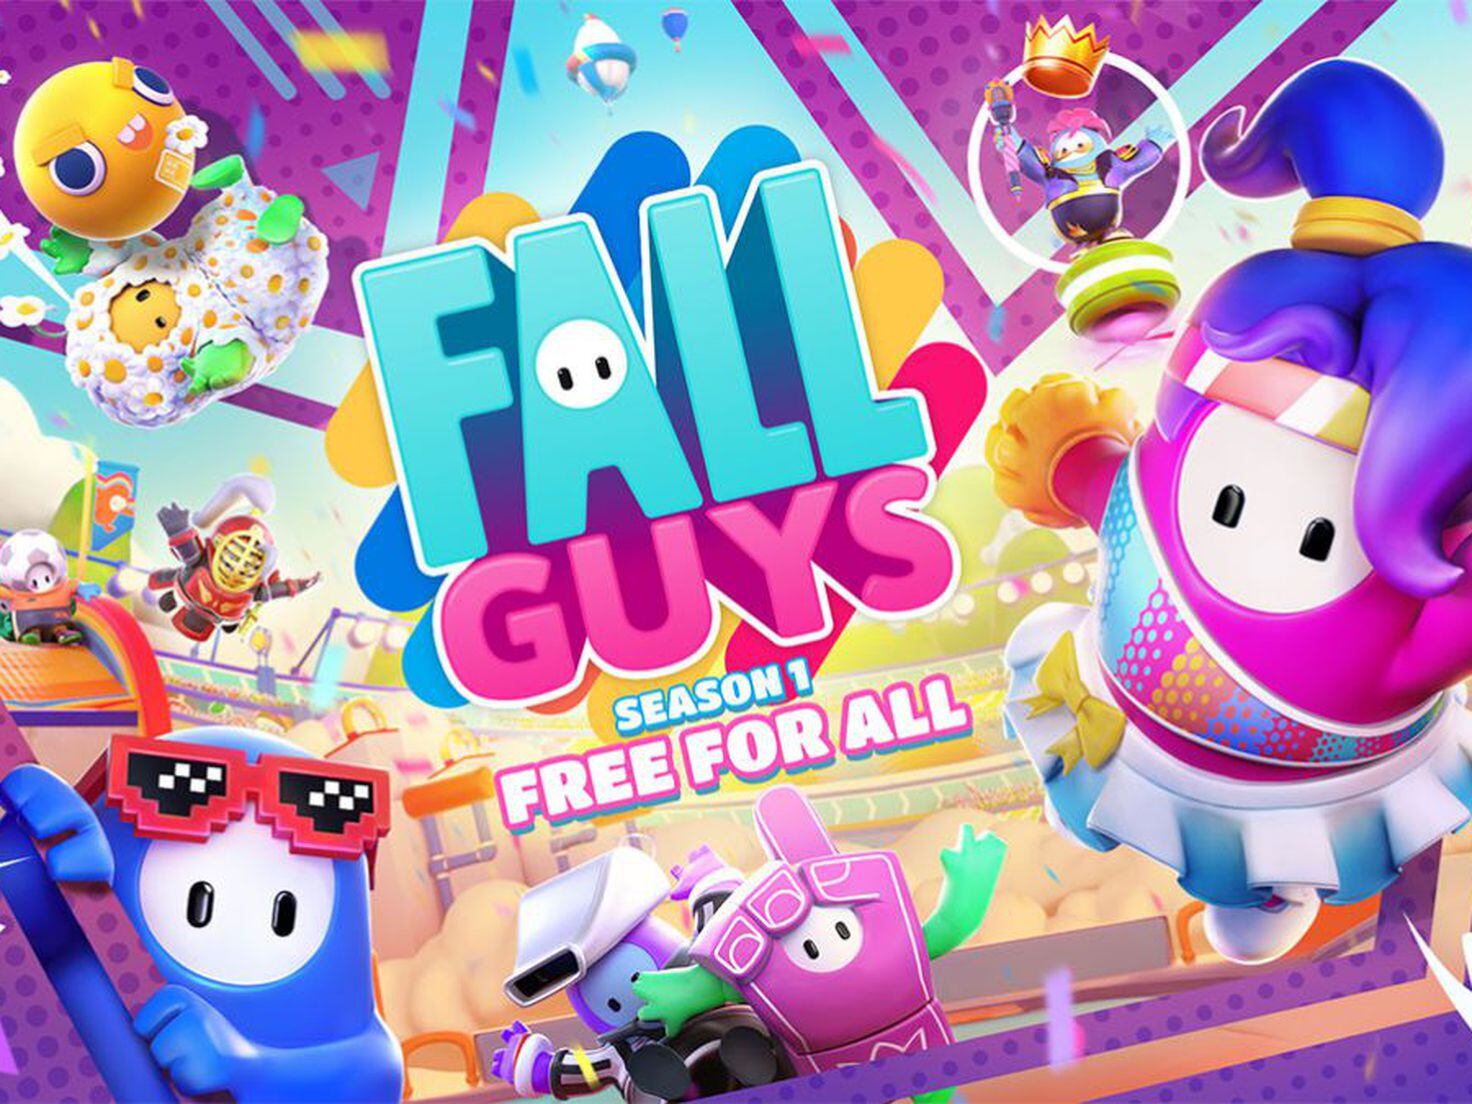 Fall Guys Xbox, Switch release delayed, but will feature cross